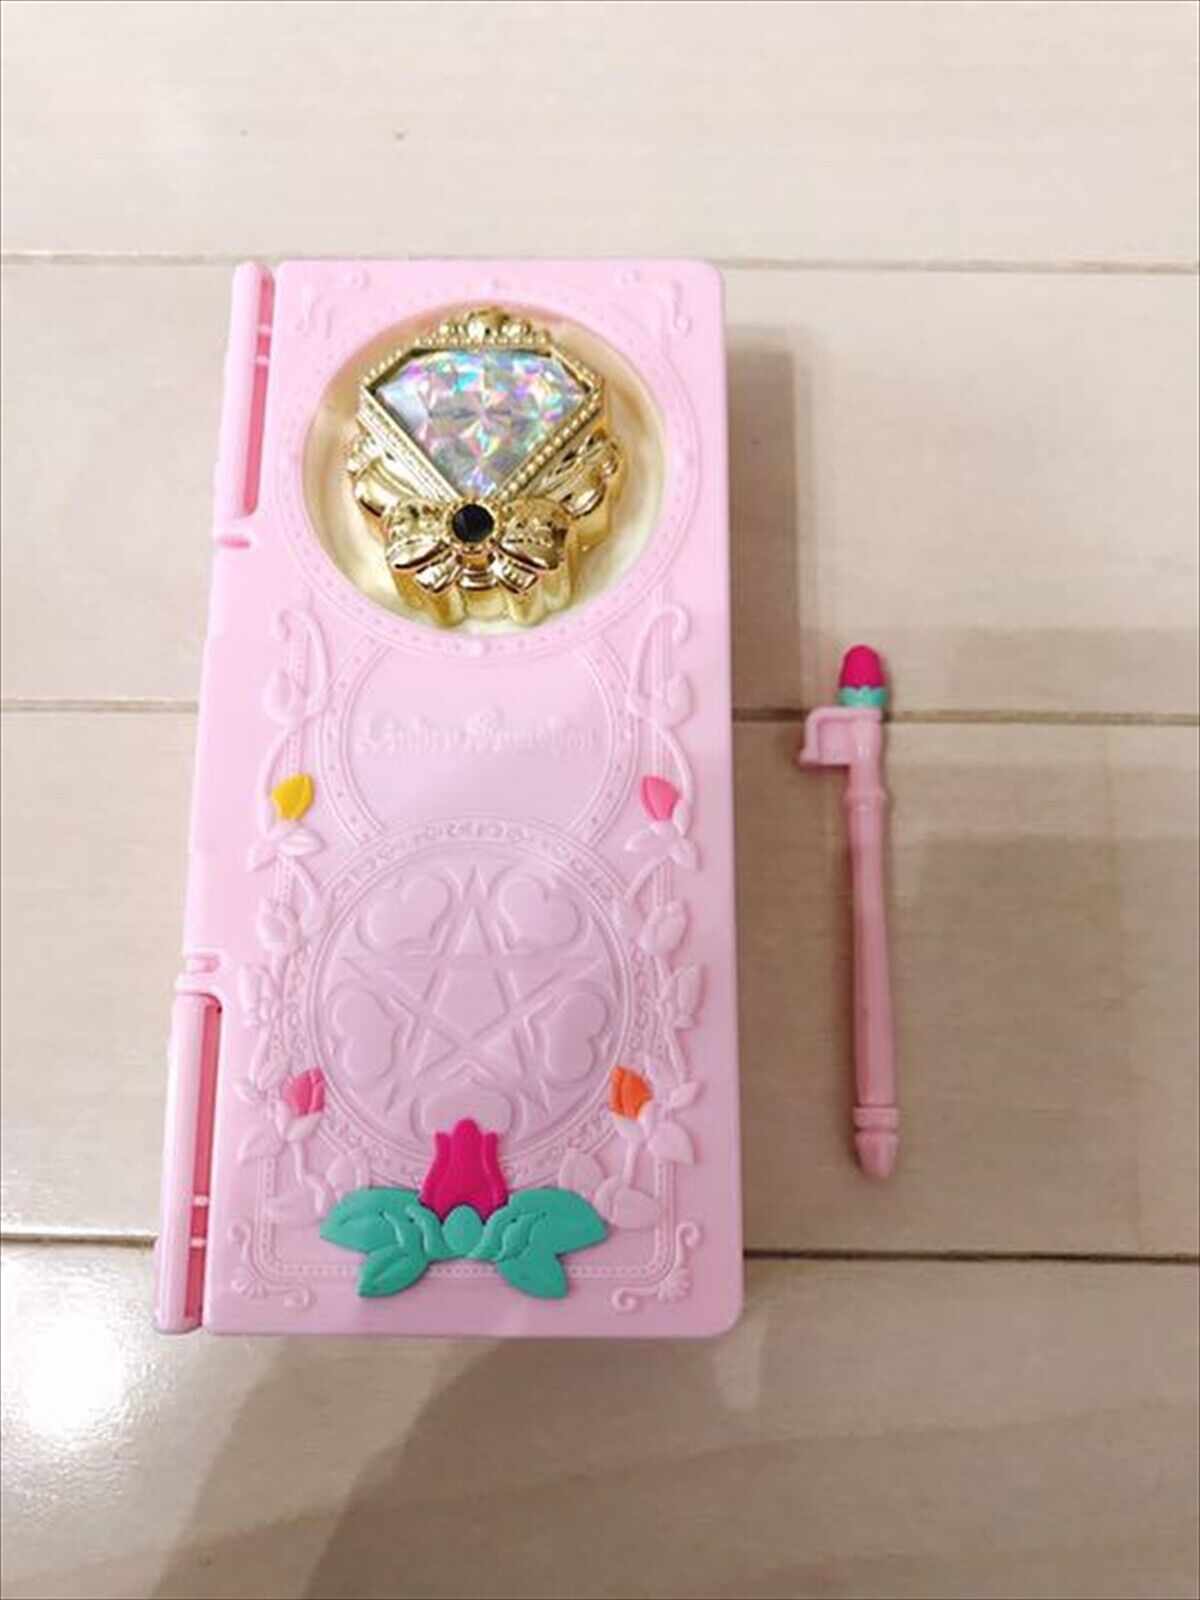 Bandai Witch Pretty Cure Wrinkle Smart Phone (Toy) F/S w/Tracking# Japan Used